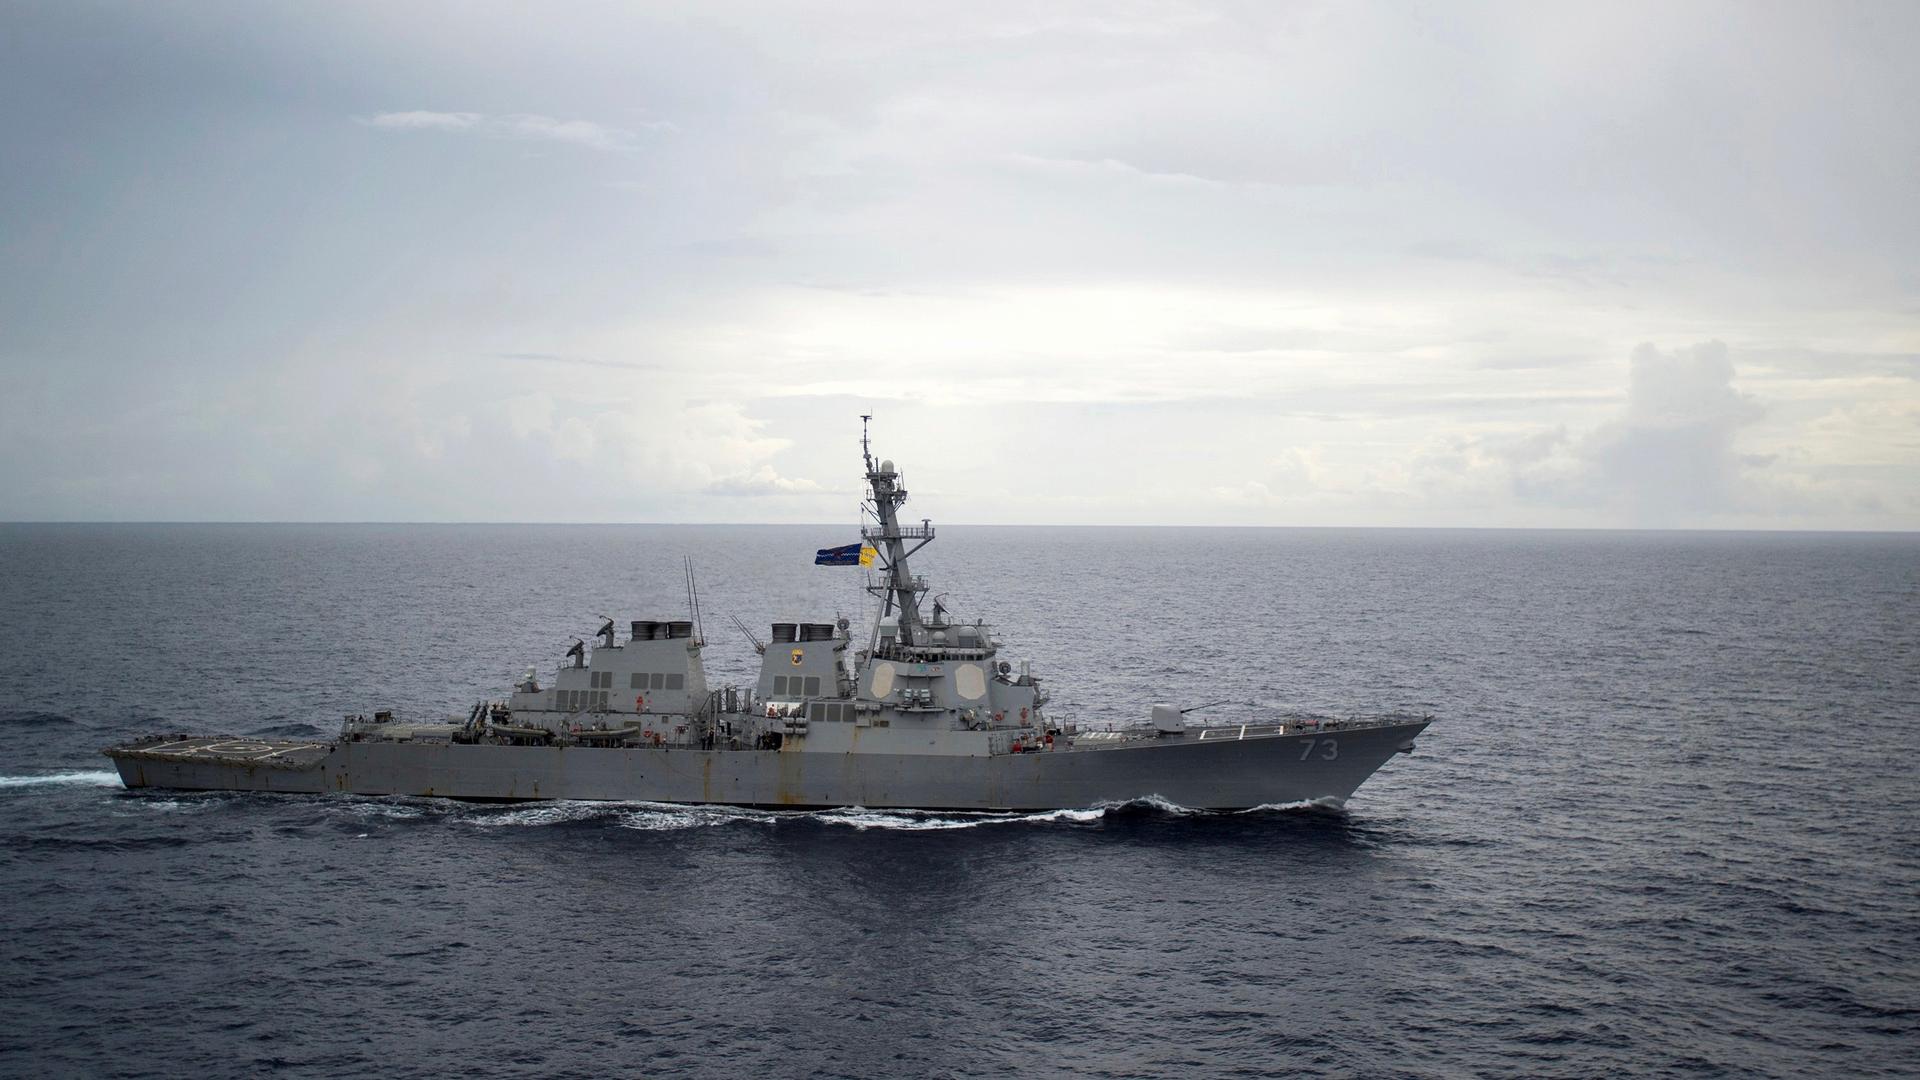 This is a 2016 photo of the guided-missile destroyer USS Decatur operating in the South China Sea. The ship was involved in a near collision early this week with a Chinese warship, according to the US military.